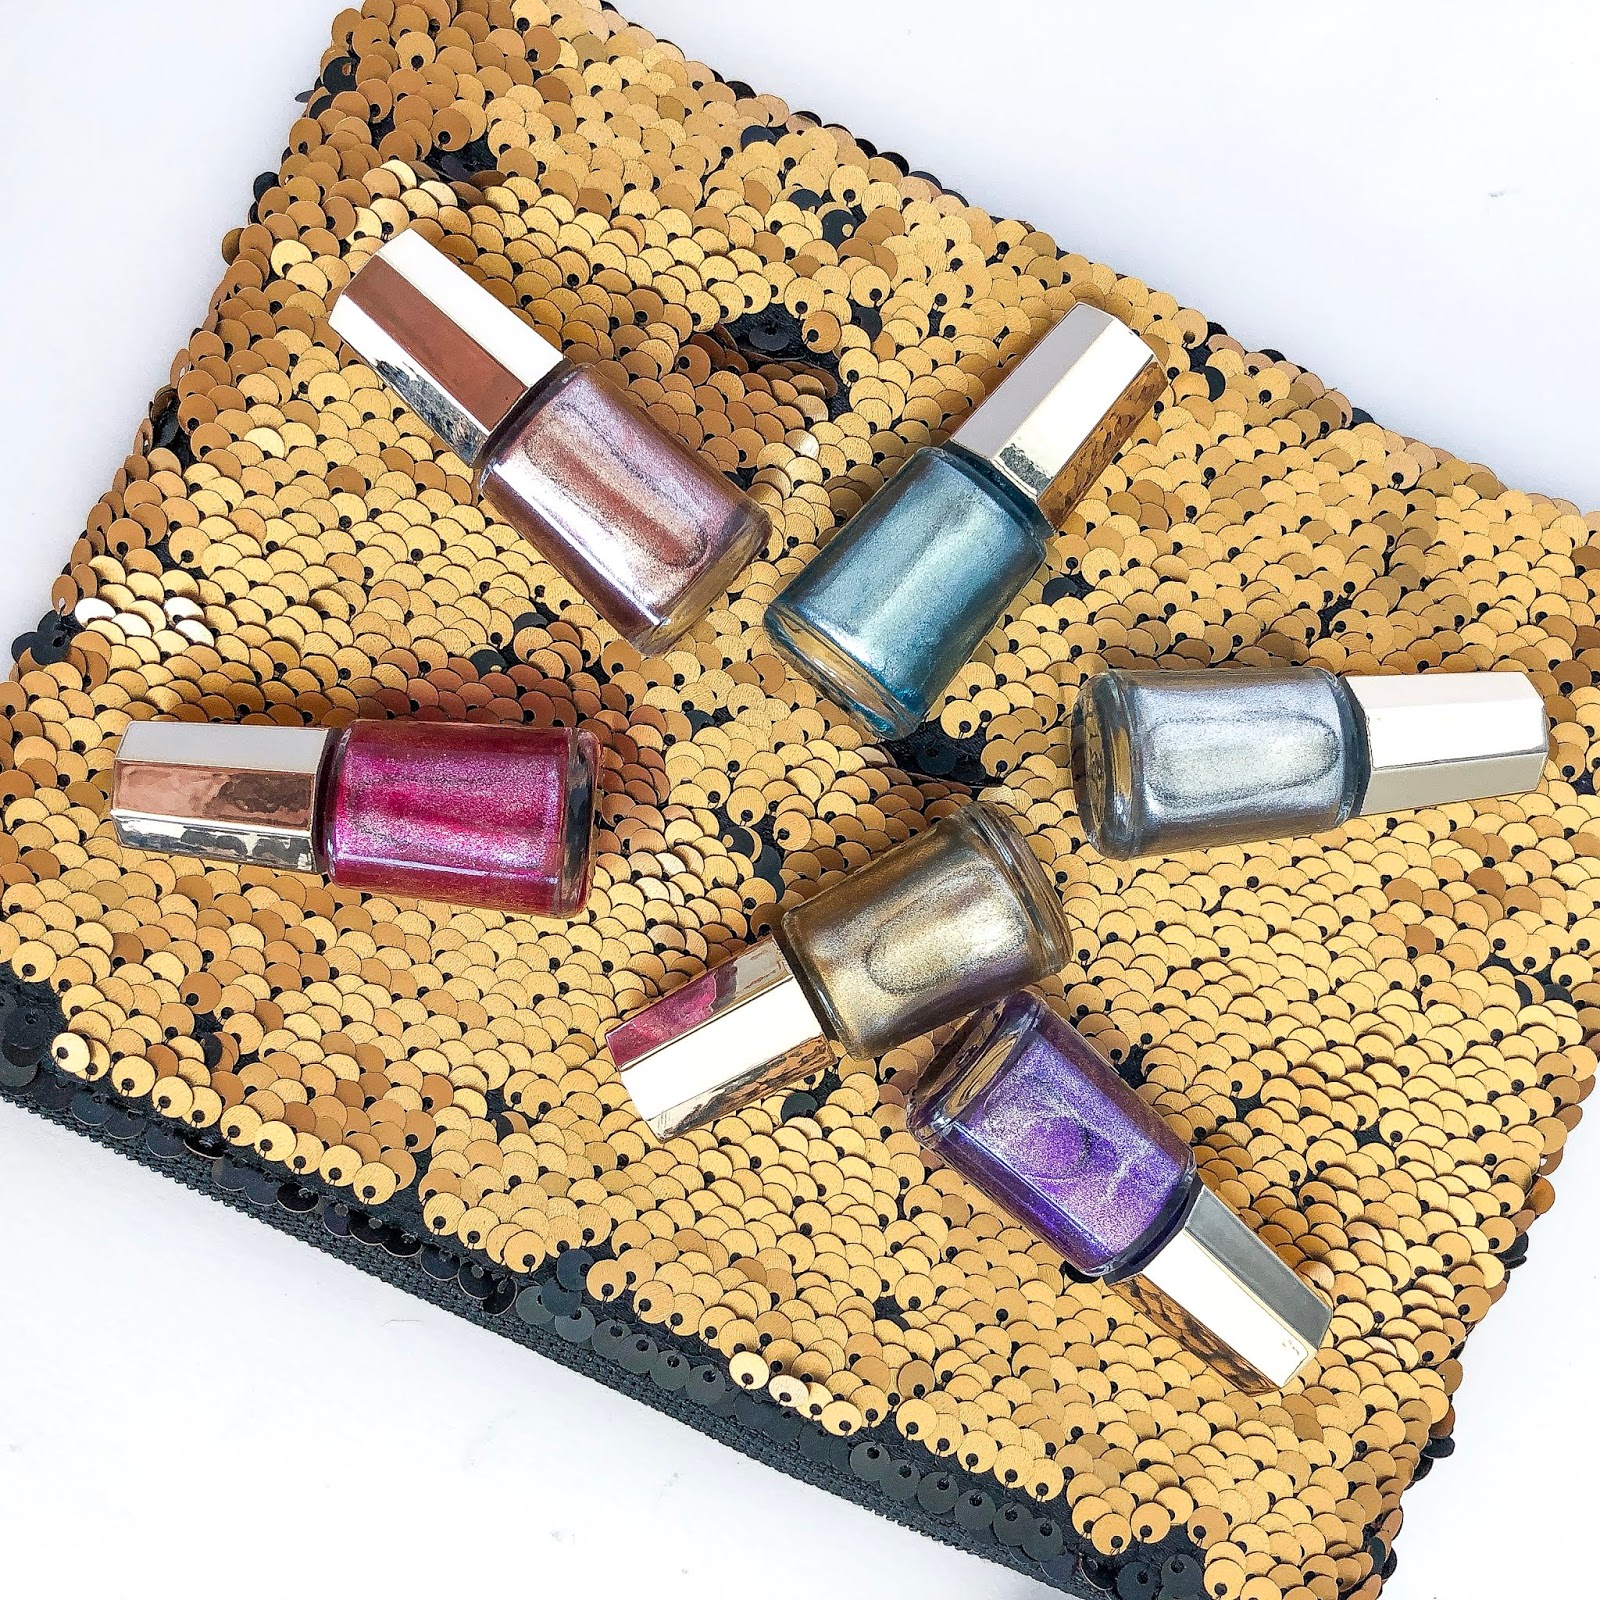 Product reveiw: mavala cyber chic nail polish collection summer 2018/19.